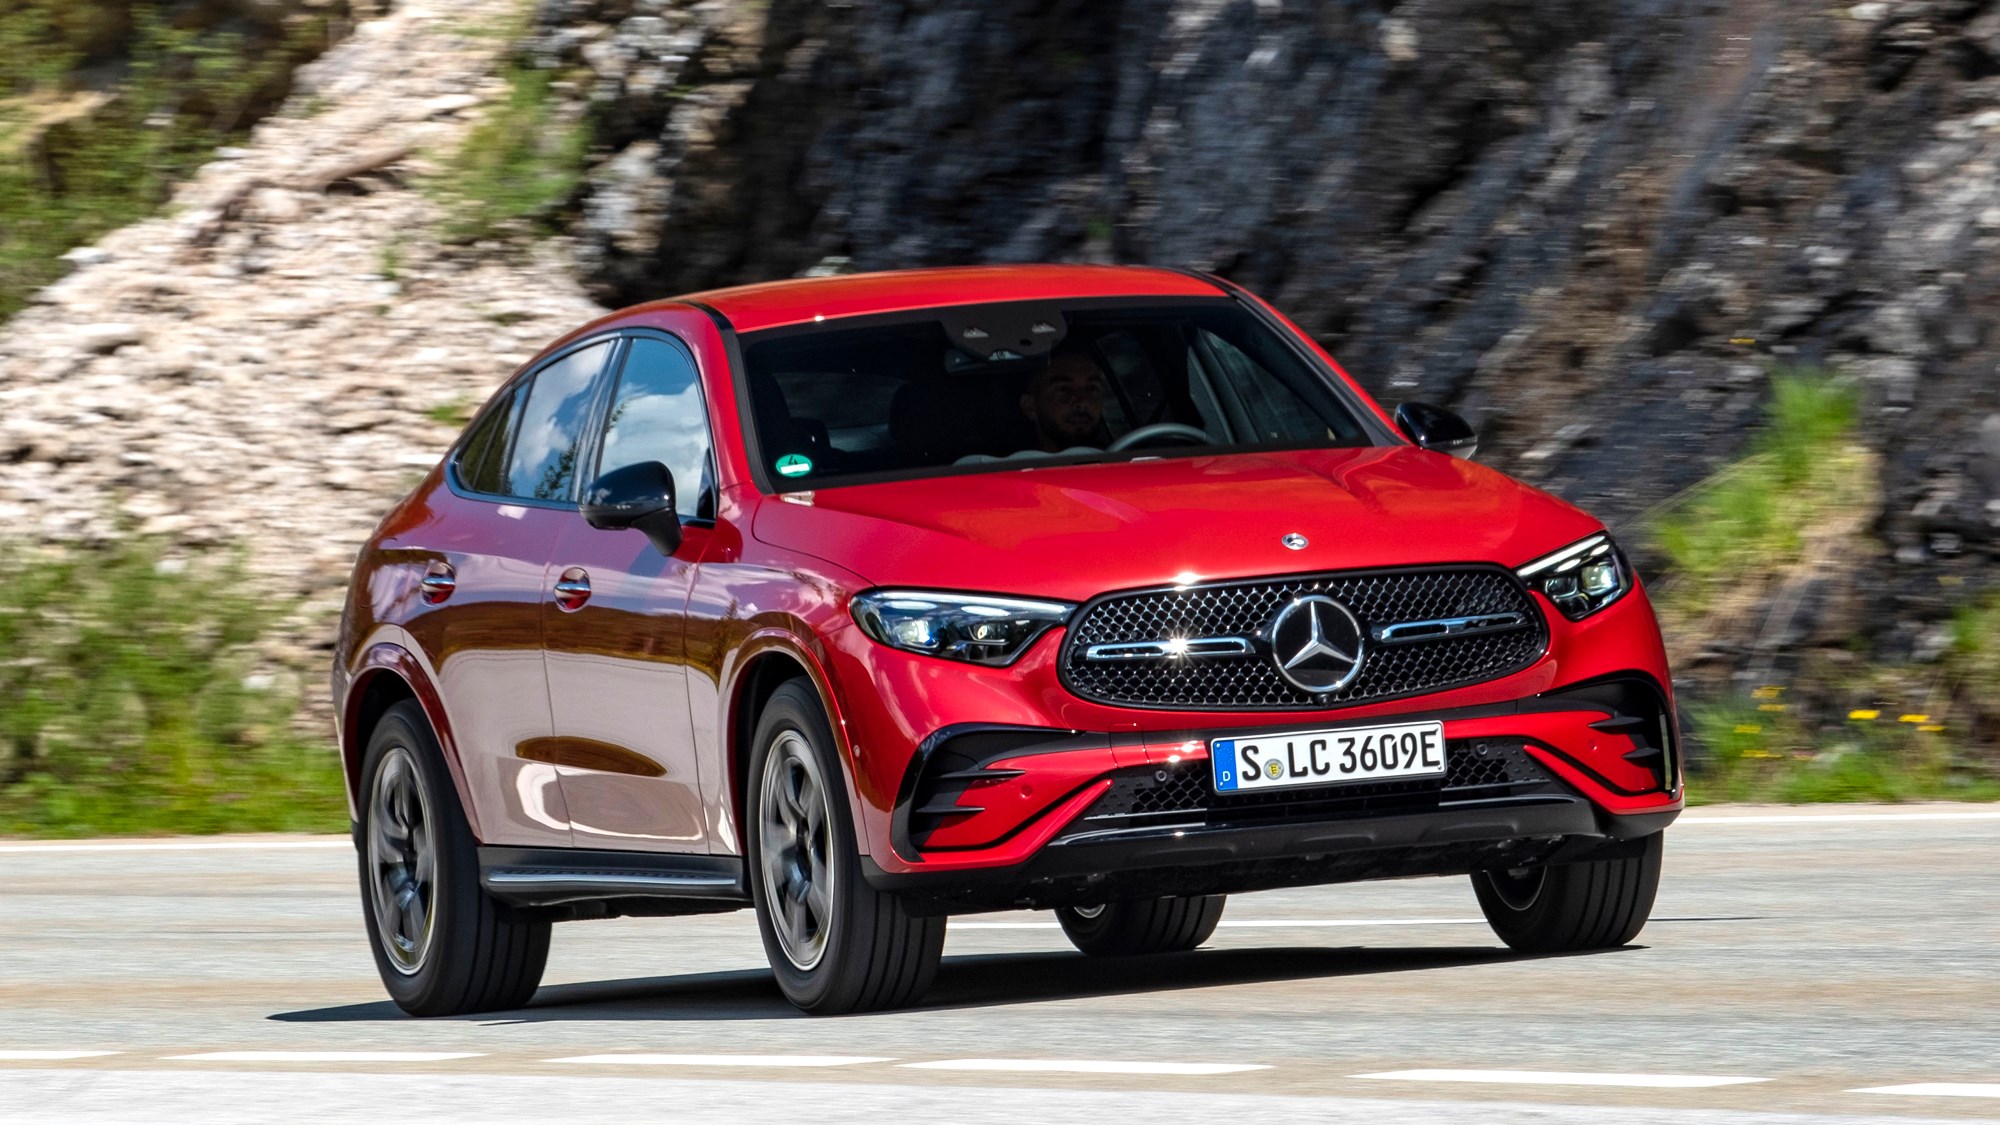 Mercedes-Benz GLC - A SUV for keen drivers?